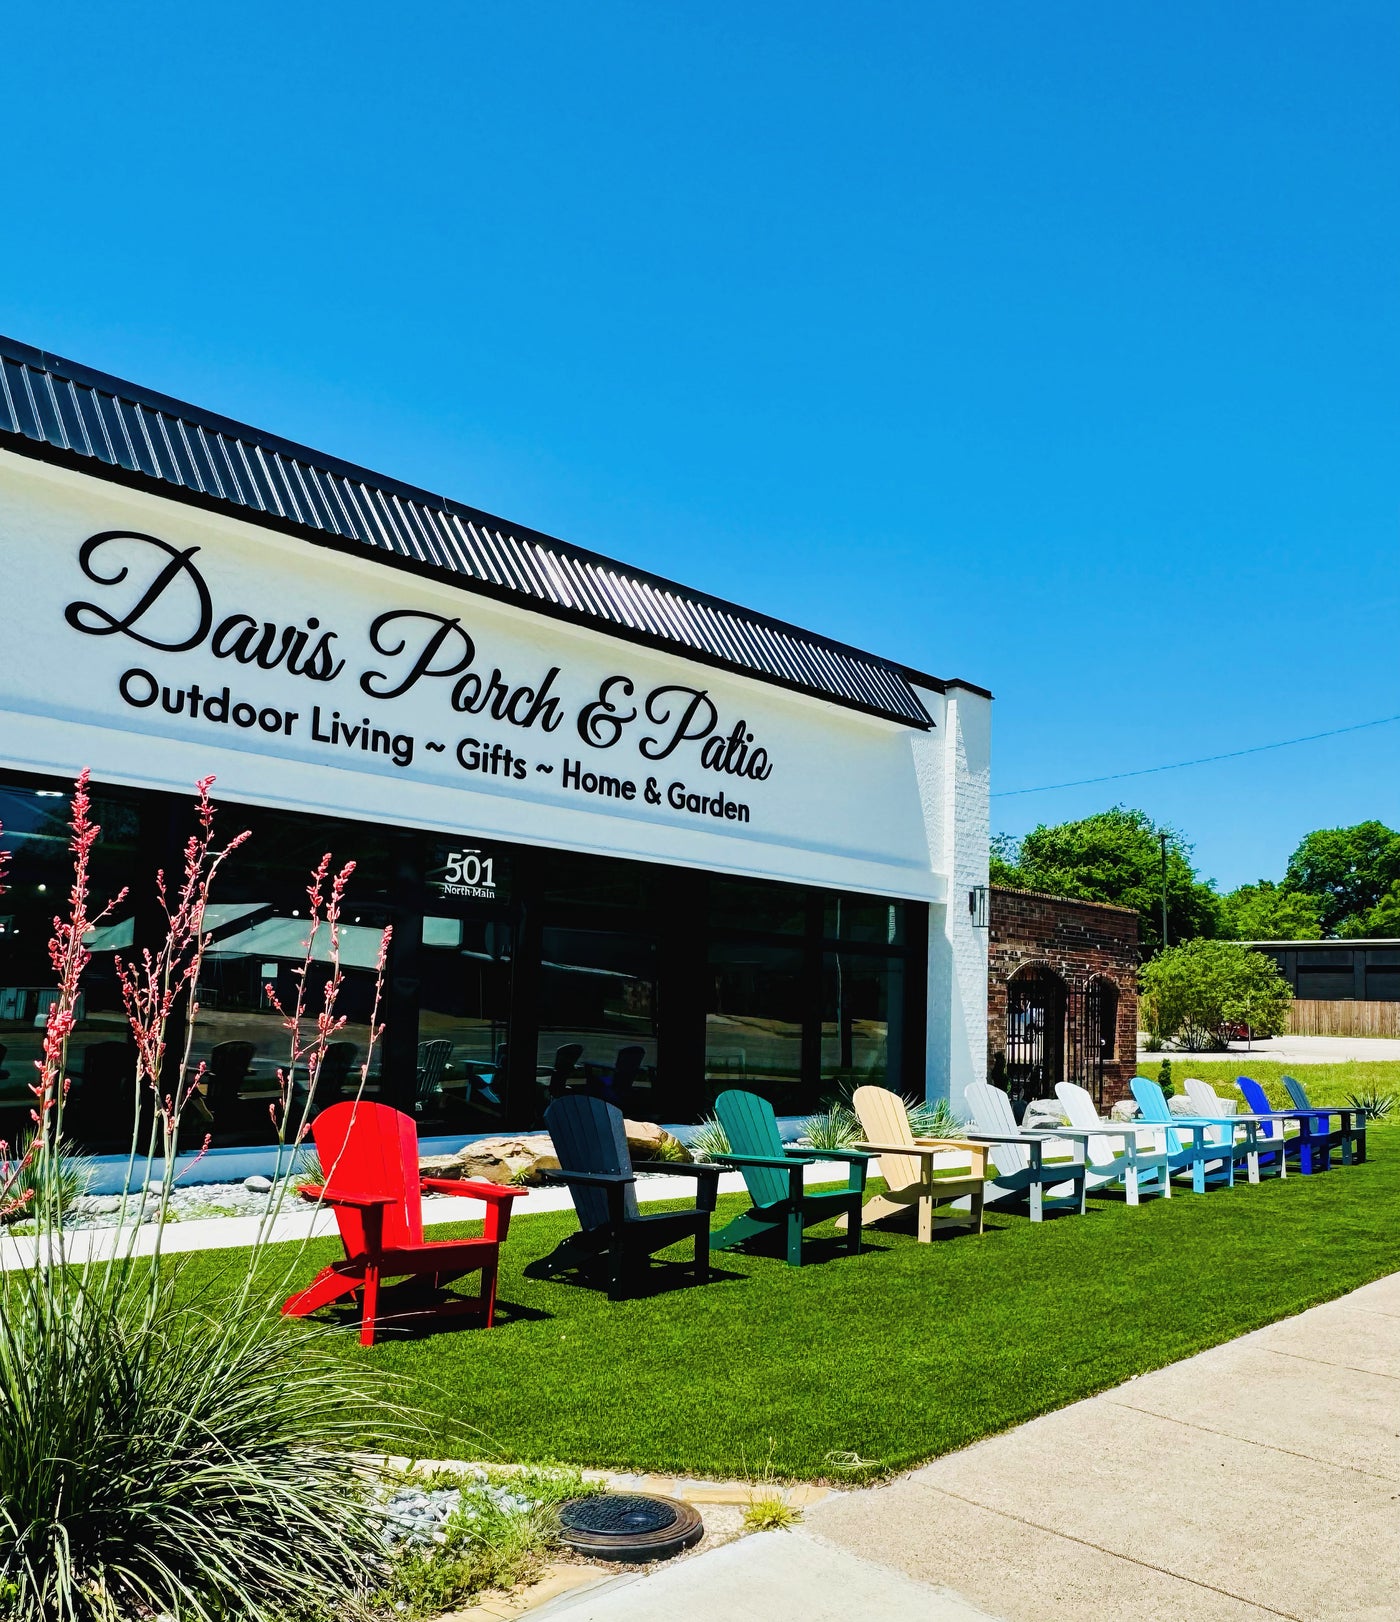 Davis Porch and Patio outdoor living and patio furniture store in Weatherford Texas. We design and manufacture our own poly outdoor furniture line. 